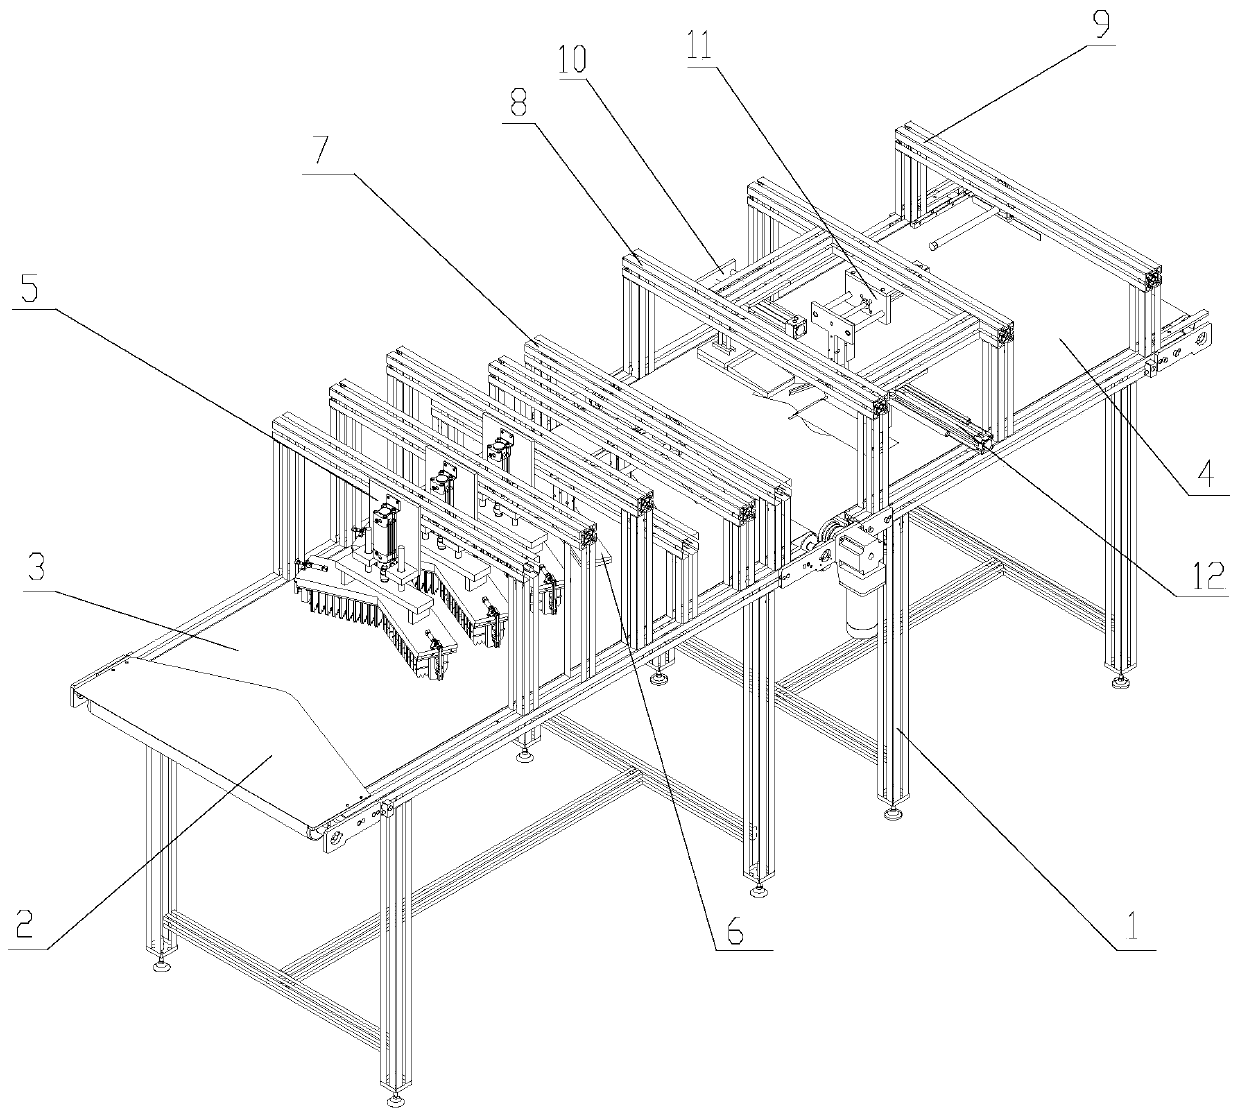 Automatic pairing and folding machine for socks